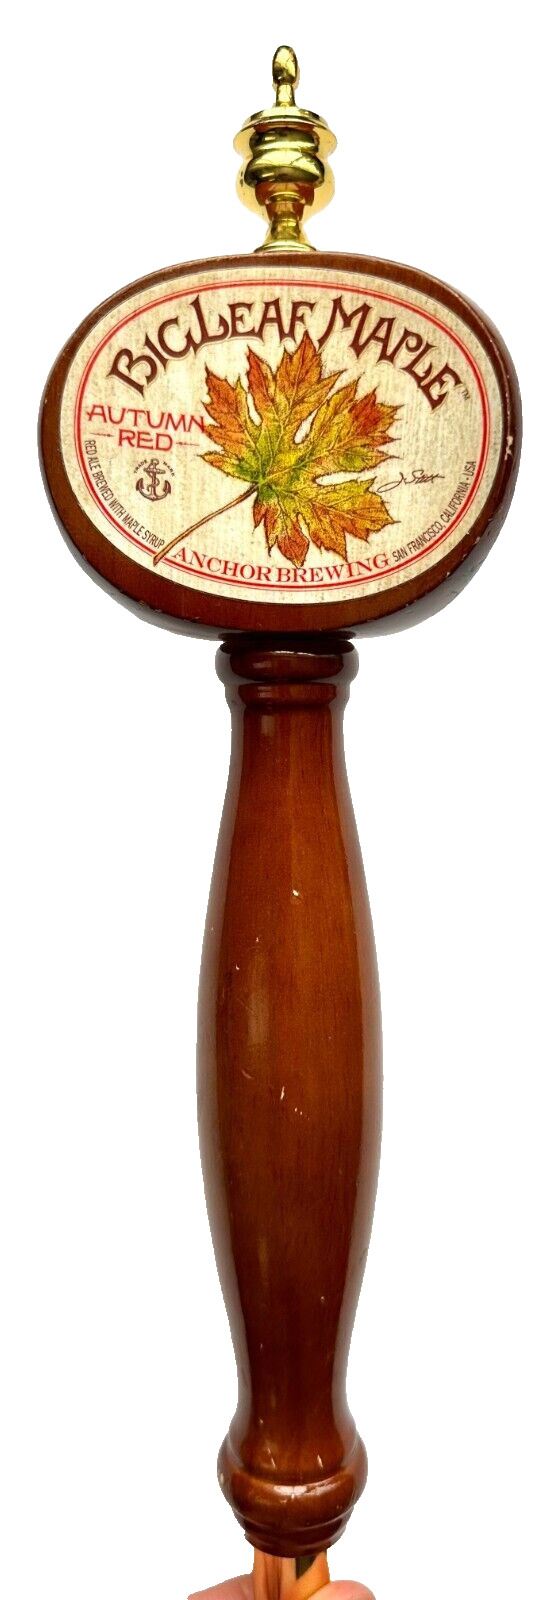 ANCHOR STEAM - BIG LEAF MAPLE - AUTUMN RED - BEER TAP HANDLE